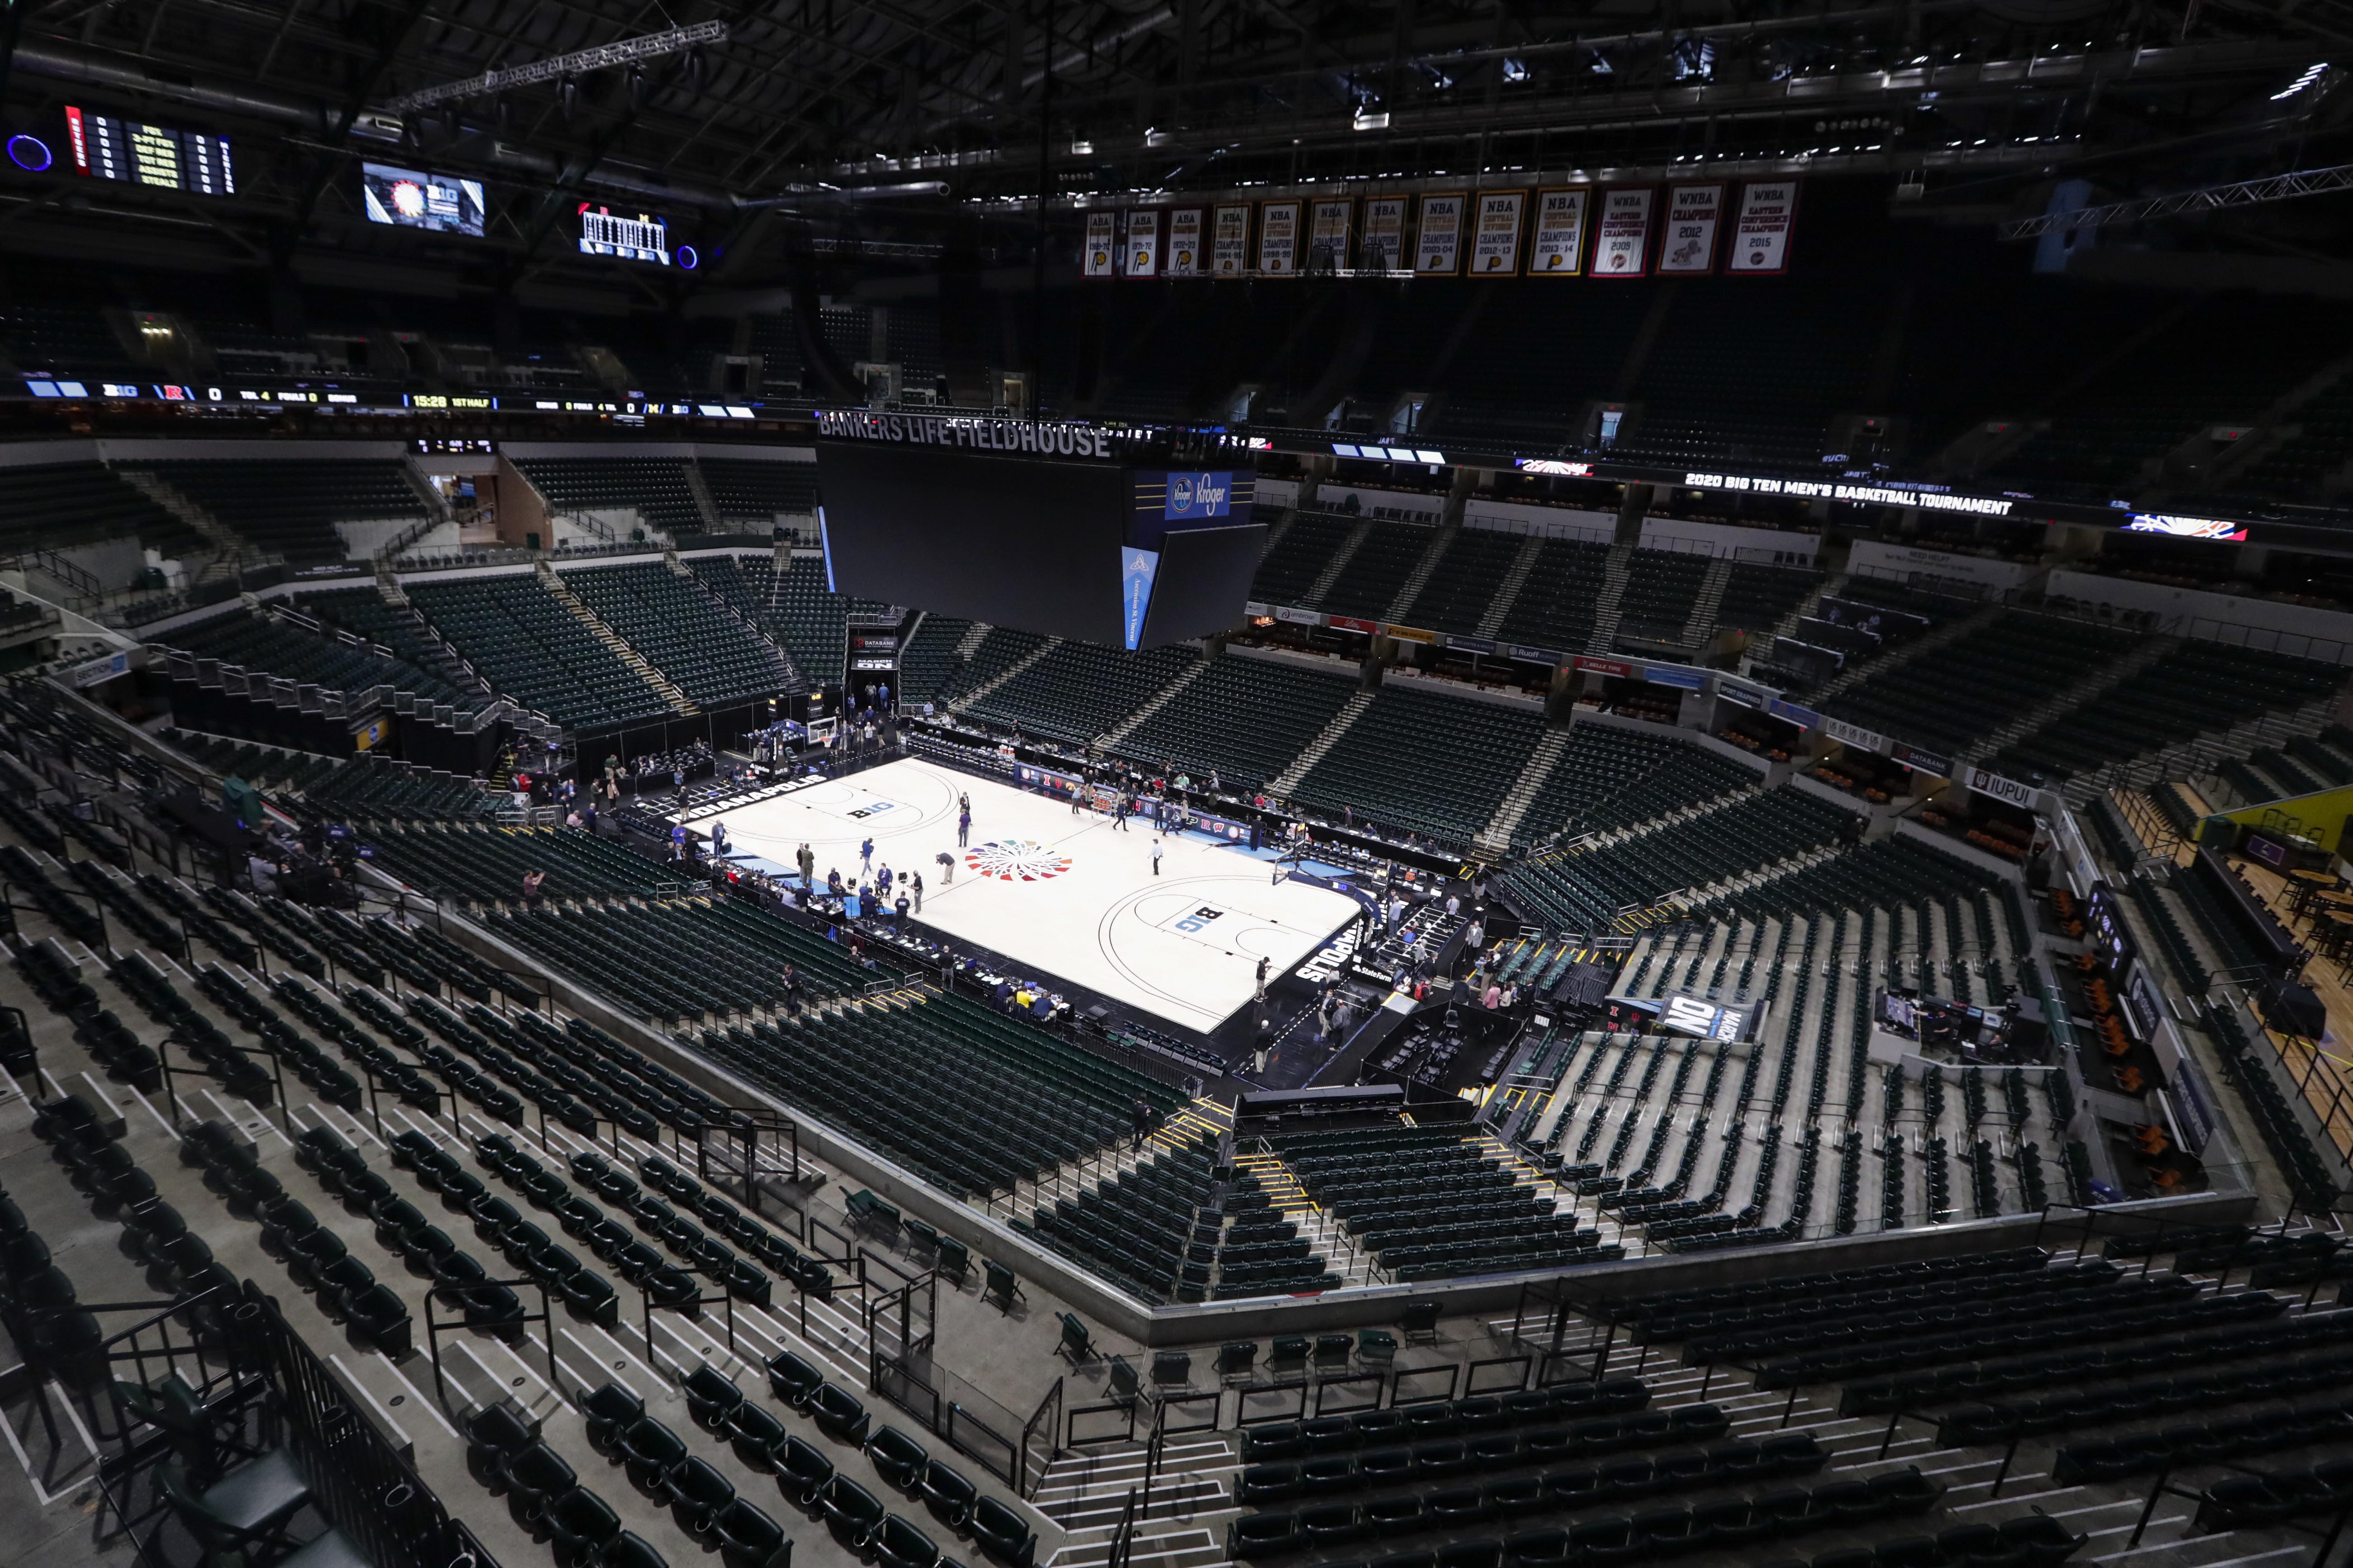 The seating area at Bankers Life Fieldhouse, Thursday, March 12, 2020, in Indianapolis